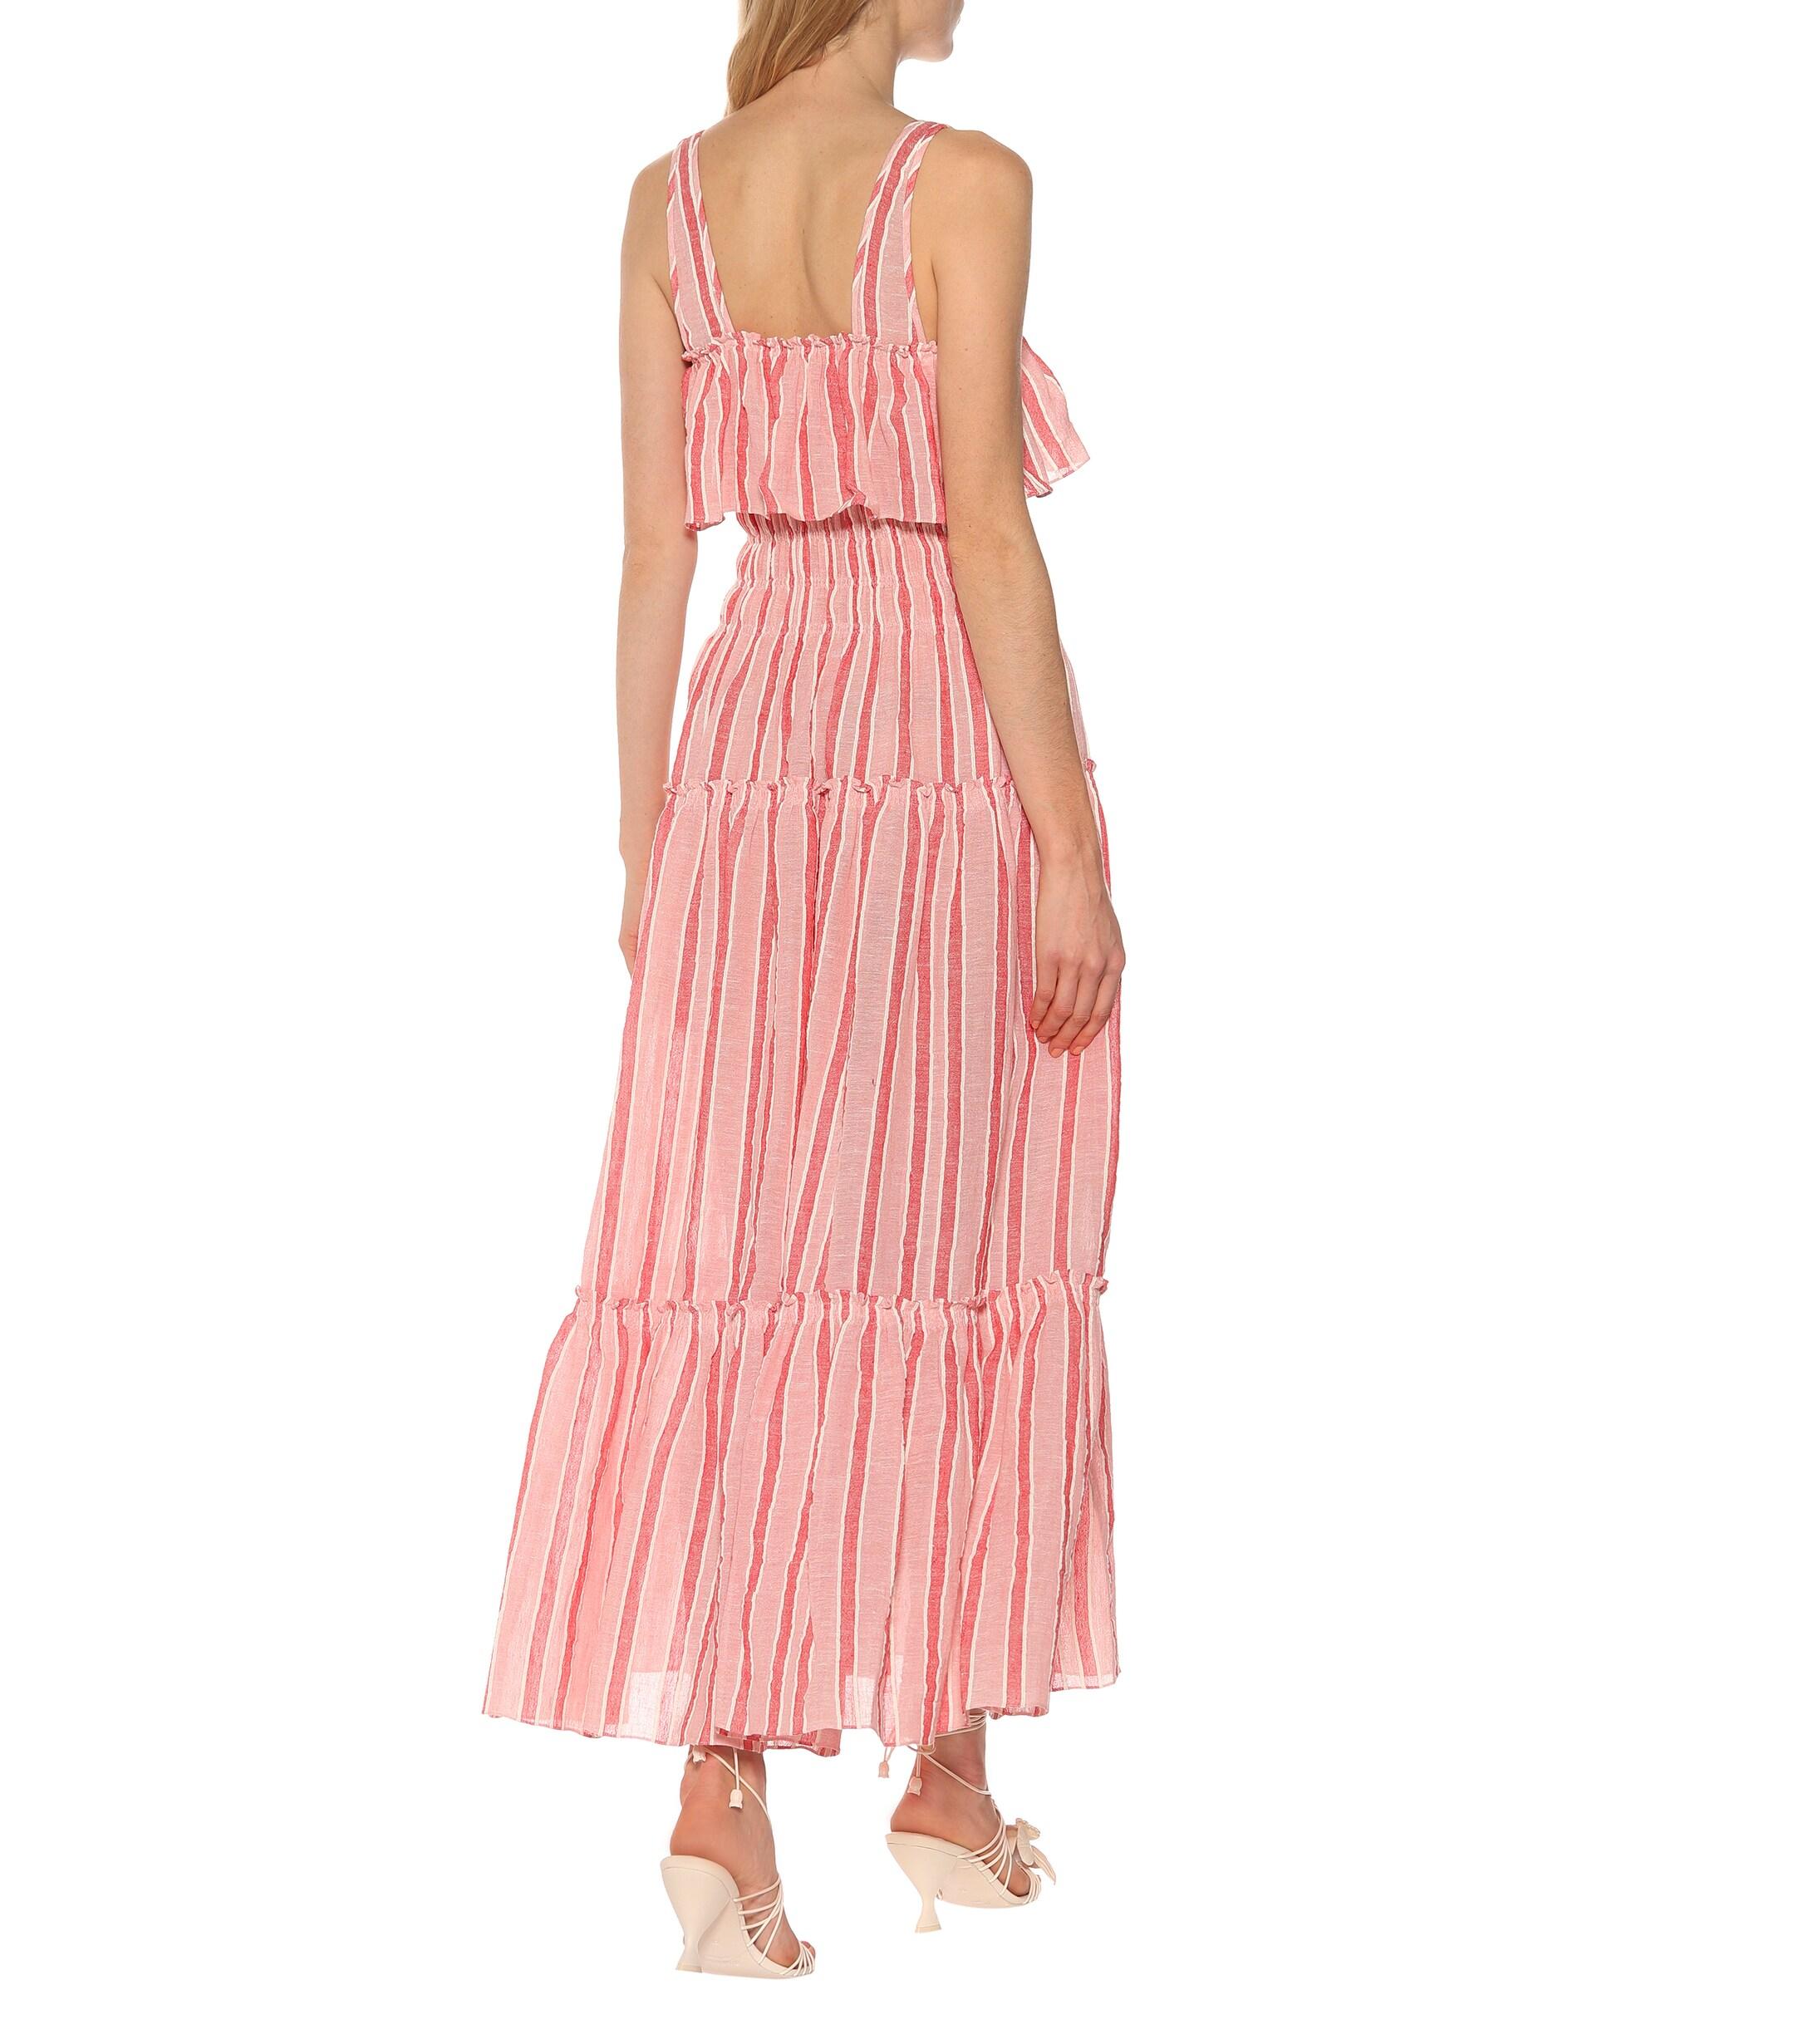 Three Graces London Striped Cotton And Linen Dress in Pink - Lyst